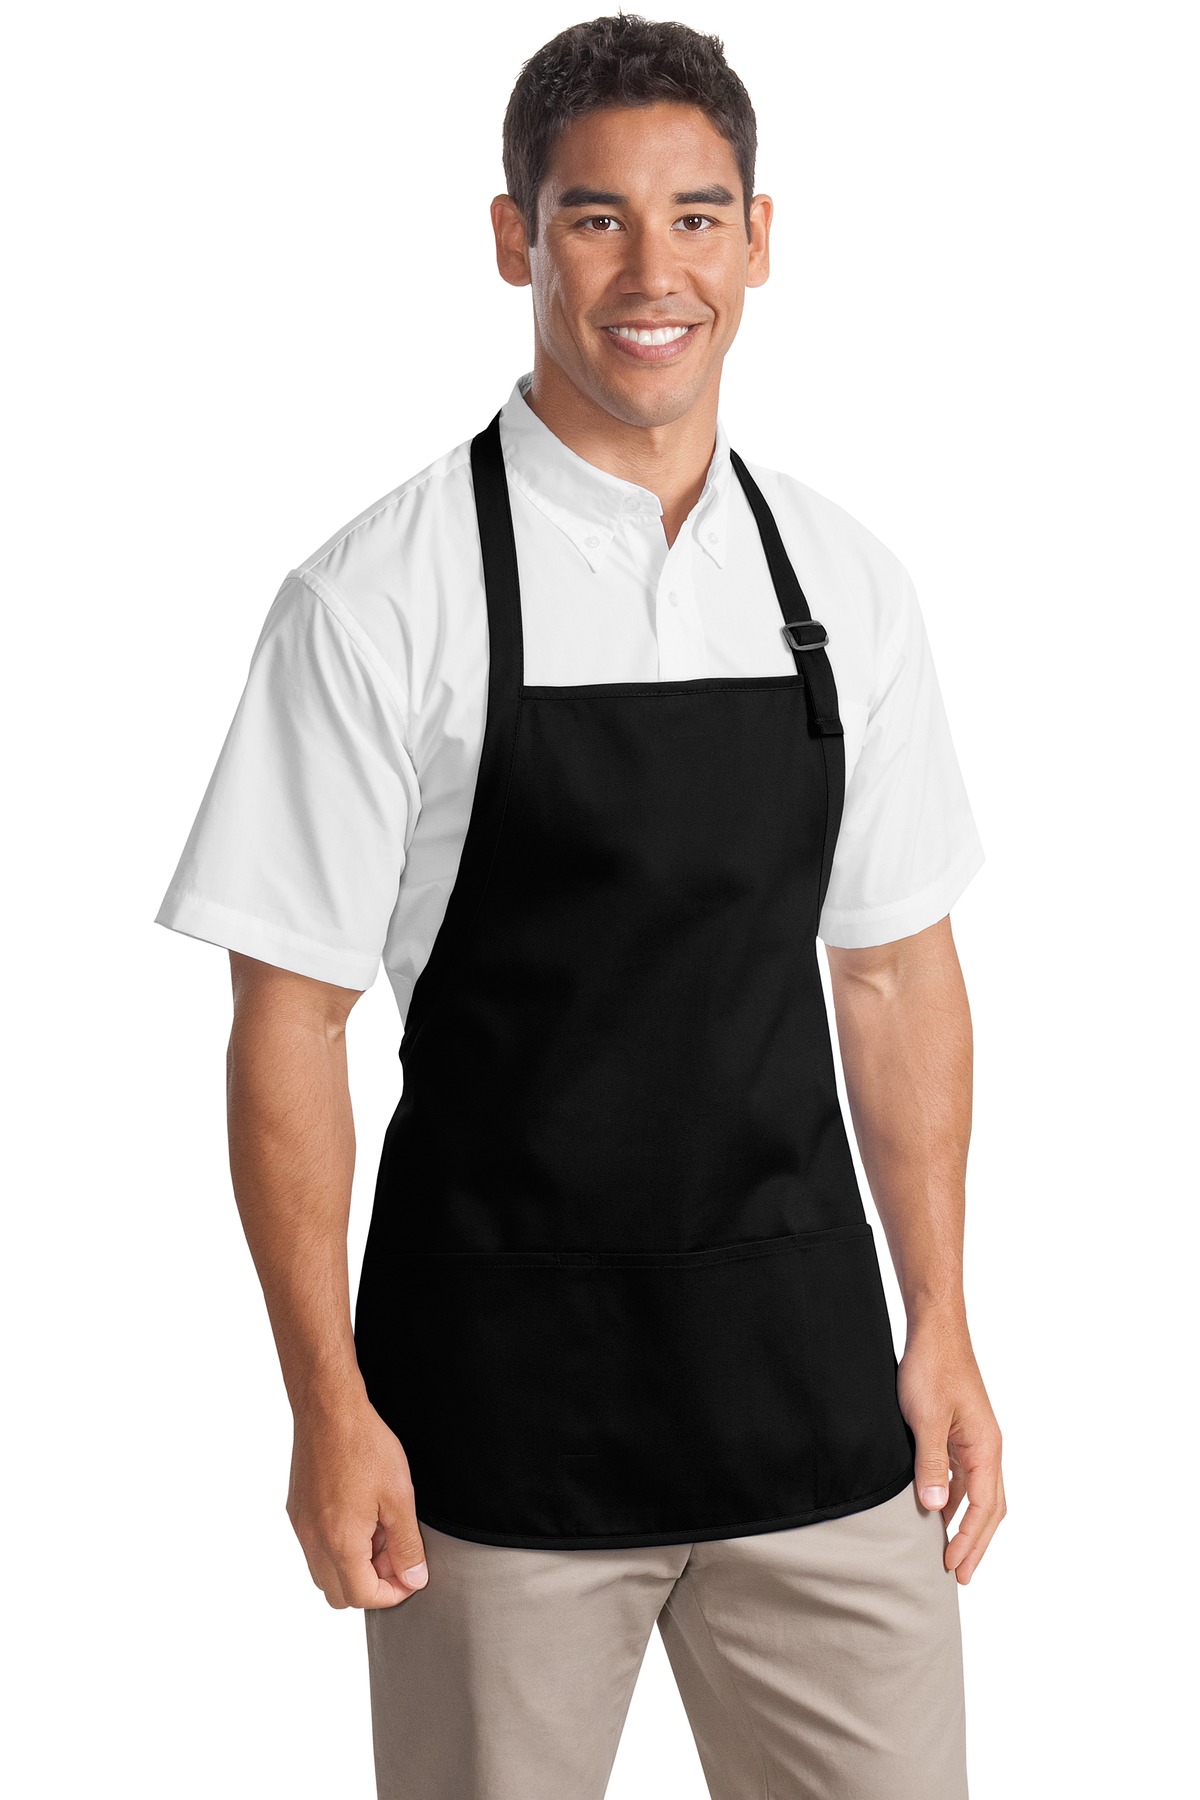 Port Authority Medium-Length Apron with Pouch Pockets....